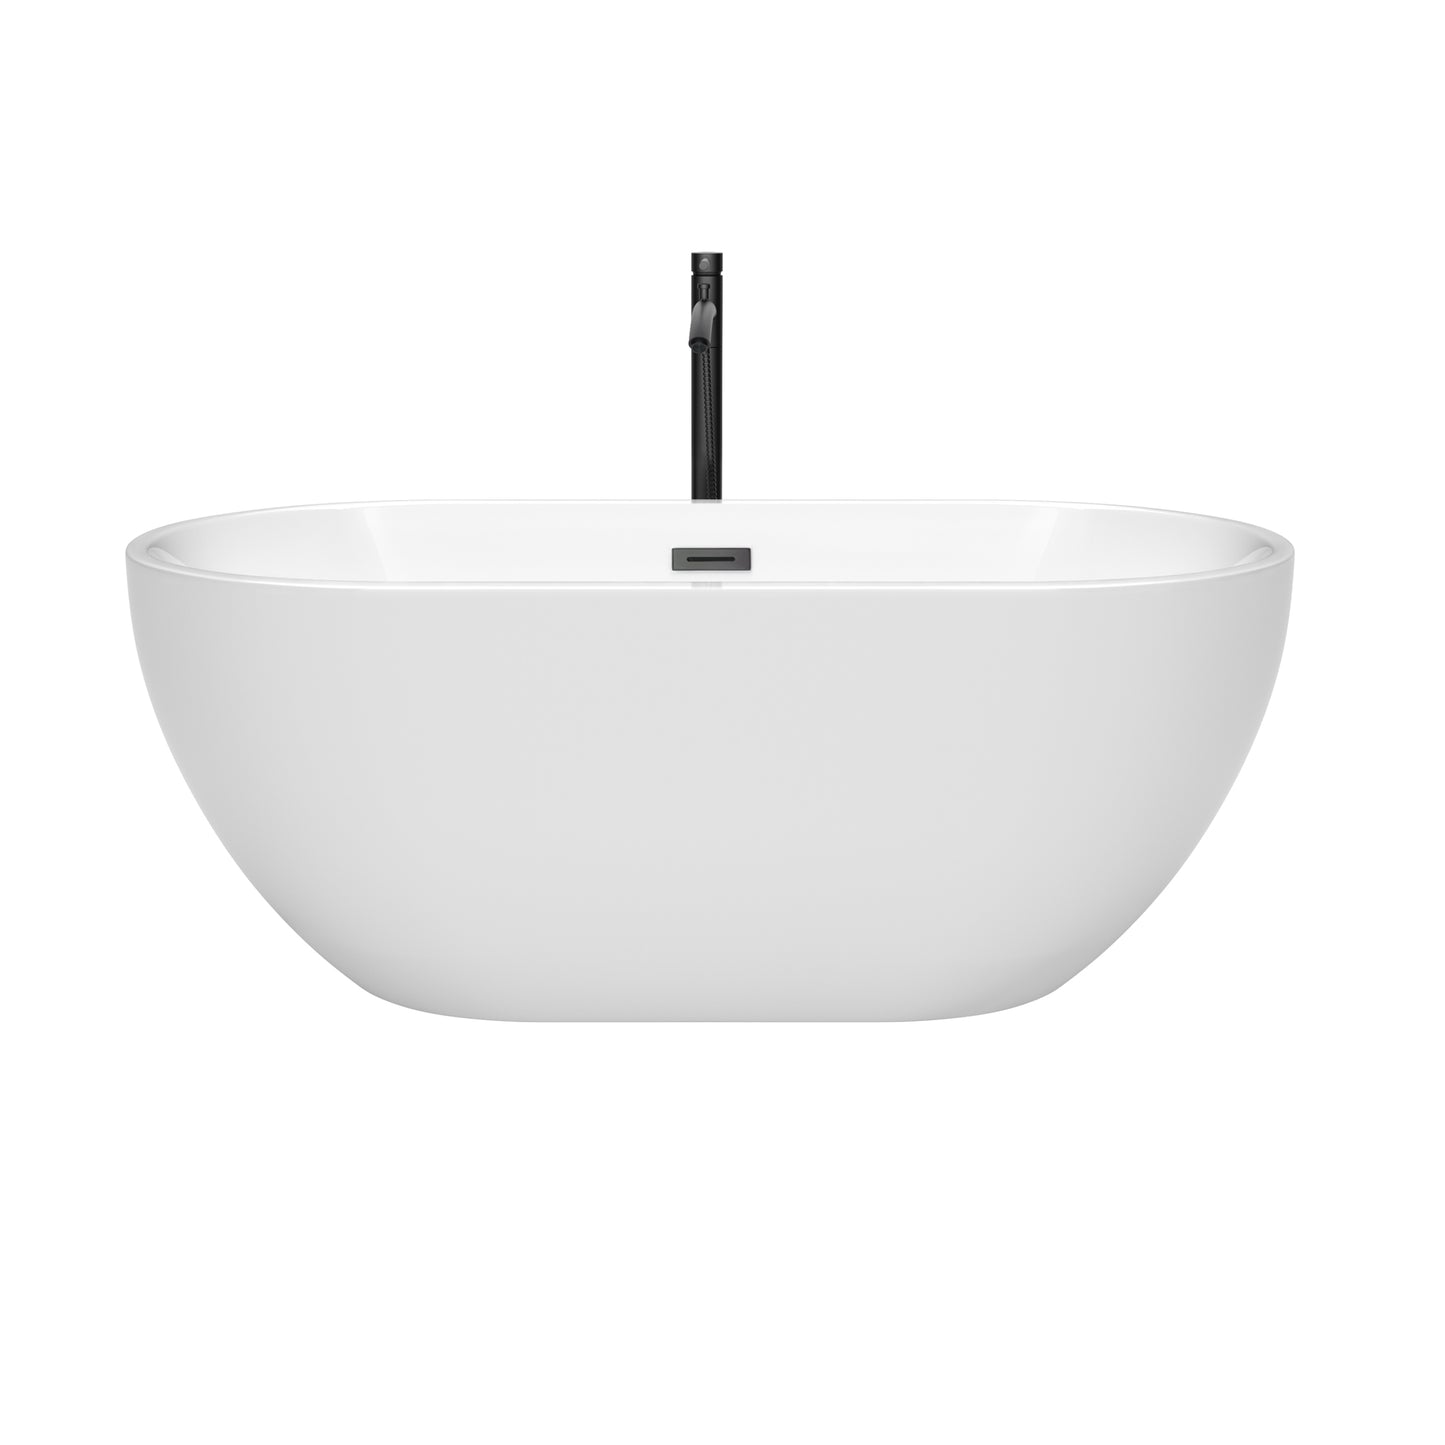 Wyndham Collection Brooklyn 60 Inch Freestanding Bathtub in White with Floor Mounted Faucet, Drain and Overflow Trim in Matte Black - Luxe Bathroom Vanities